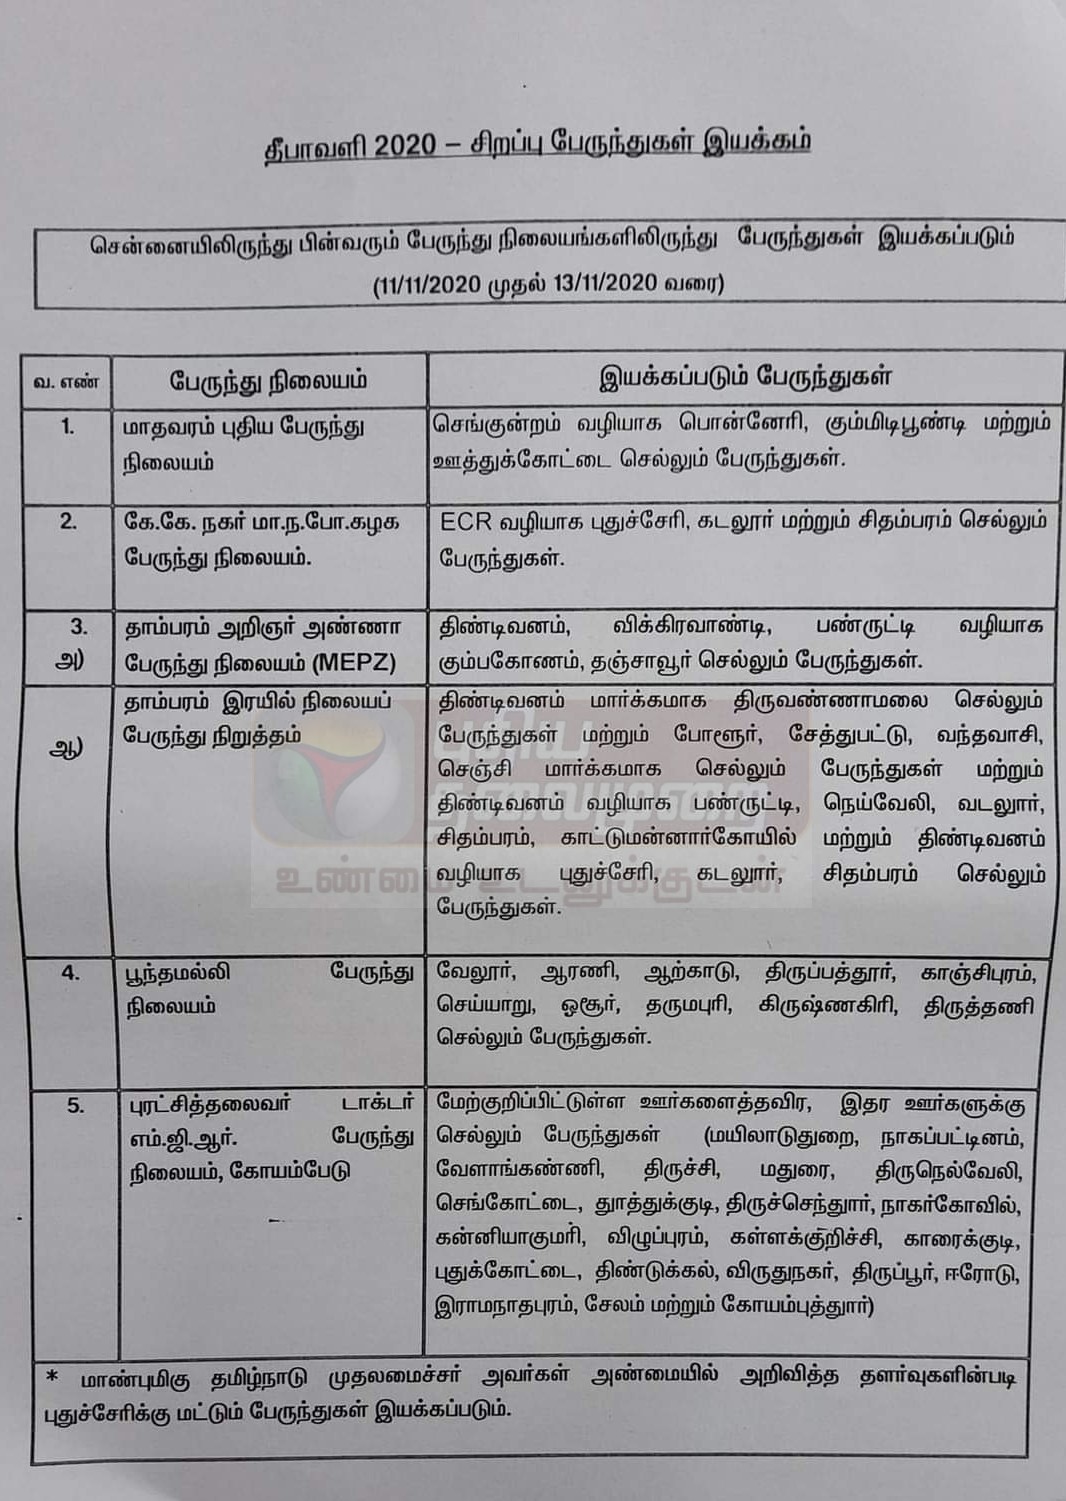 Diwali special buses announced by TN Govt in Chennai